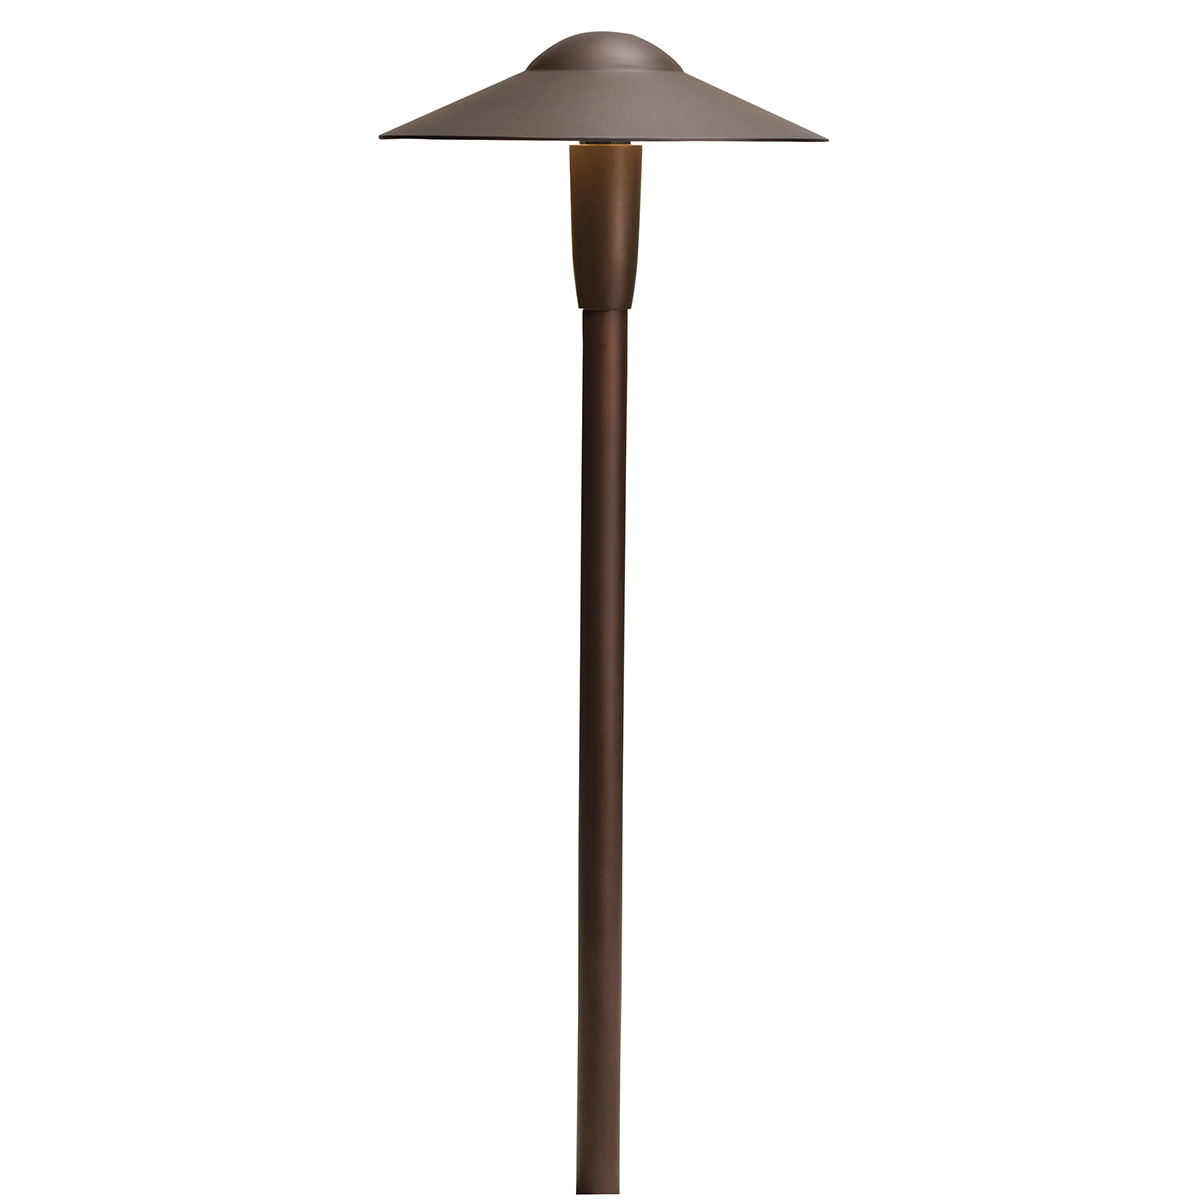 Kichler 15810AZT27R Led Dome Path Light in Textured Architectural Bronze